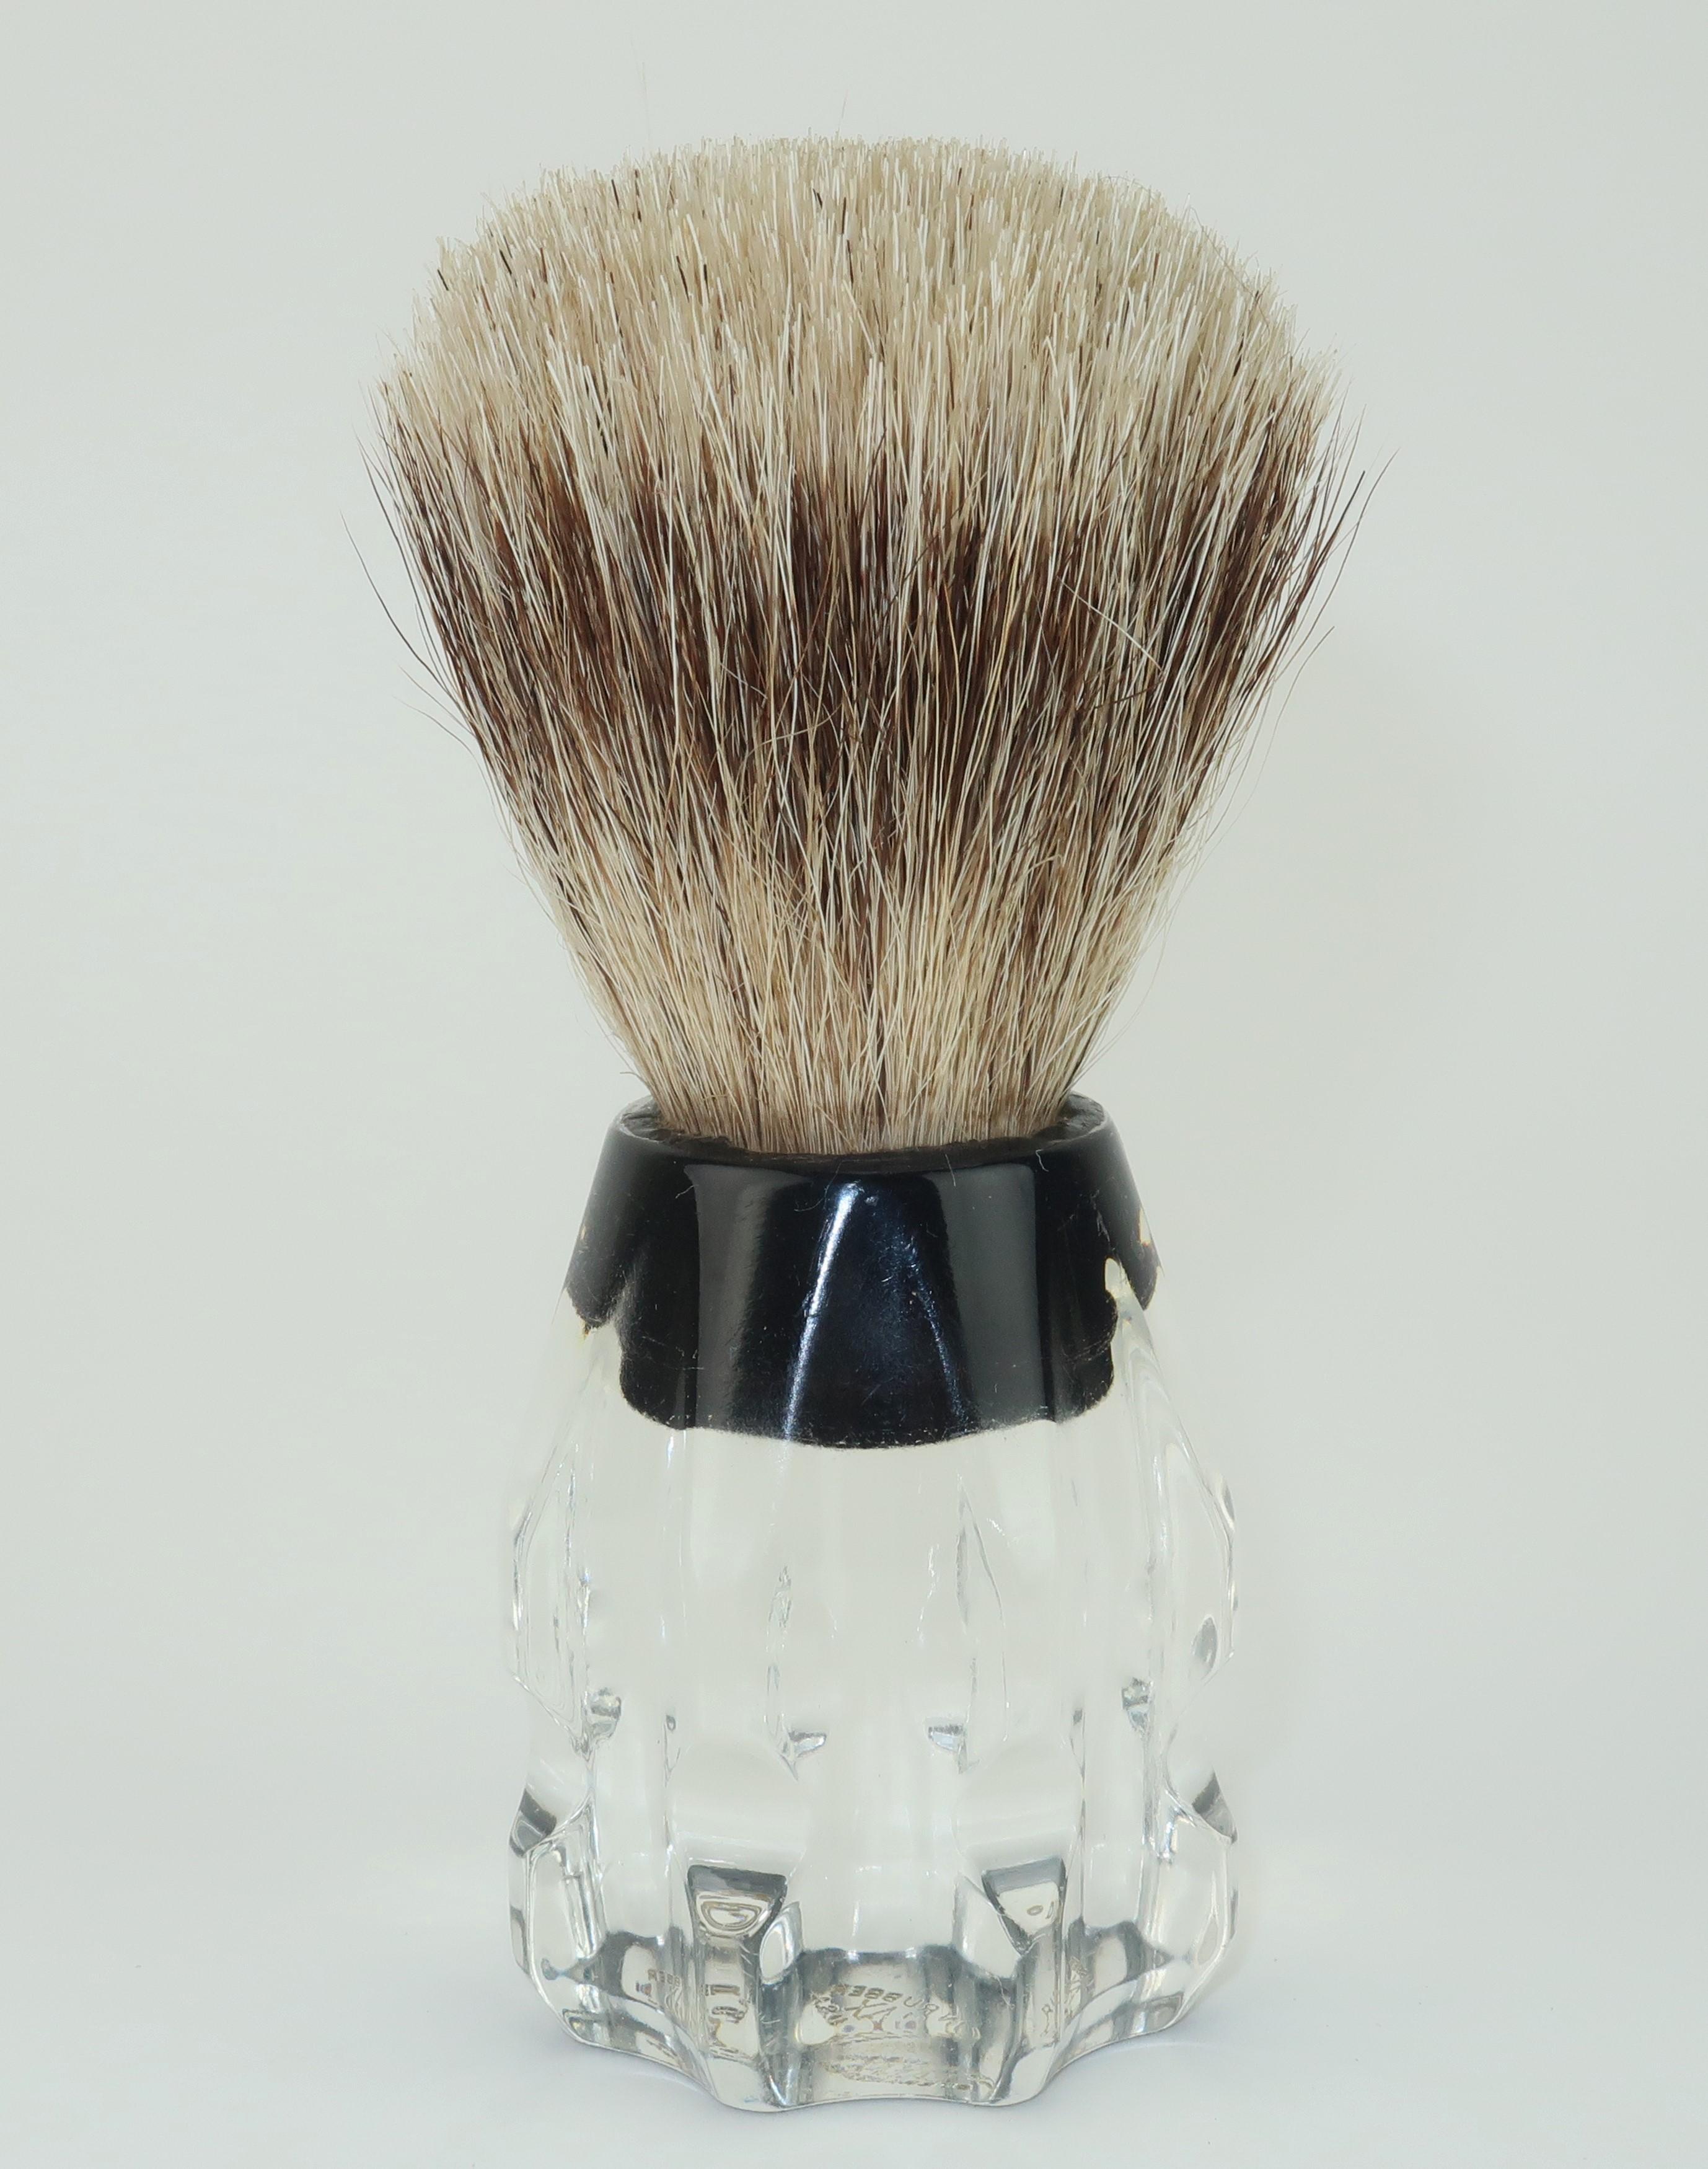 Get an old school shave with a vintage clear and black lucite handled men's shaving brush made with badger hair by Sanax.  Sturdy with a faceted grip for easy use.
CONDITION
Good vintage condition with some signs of use to the lucite handle though